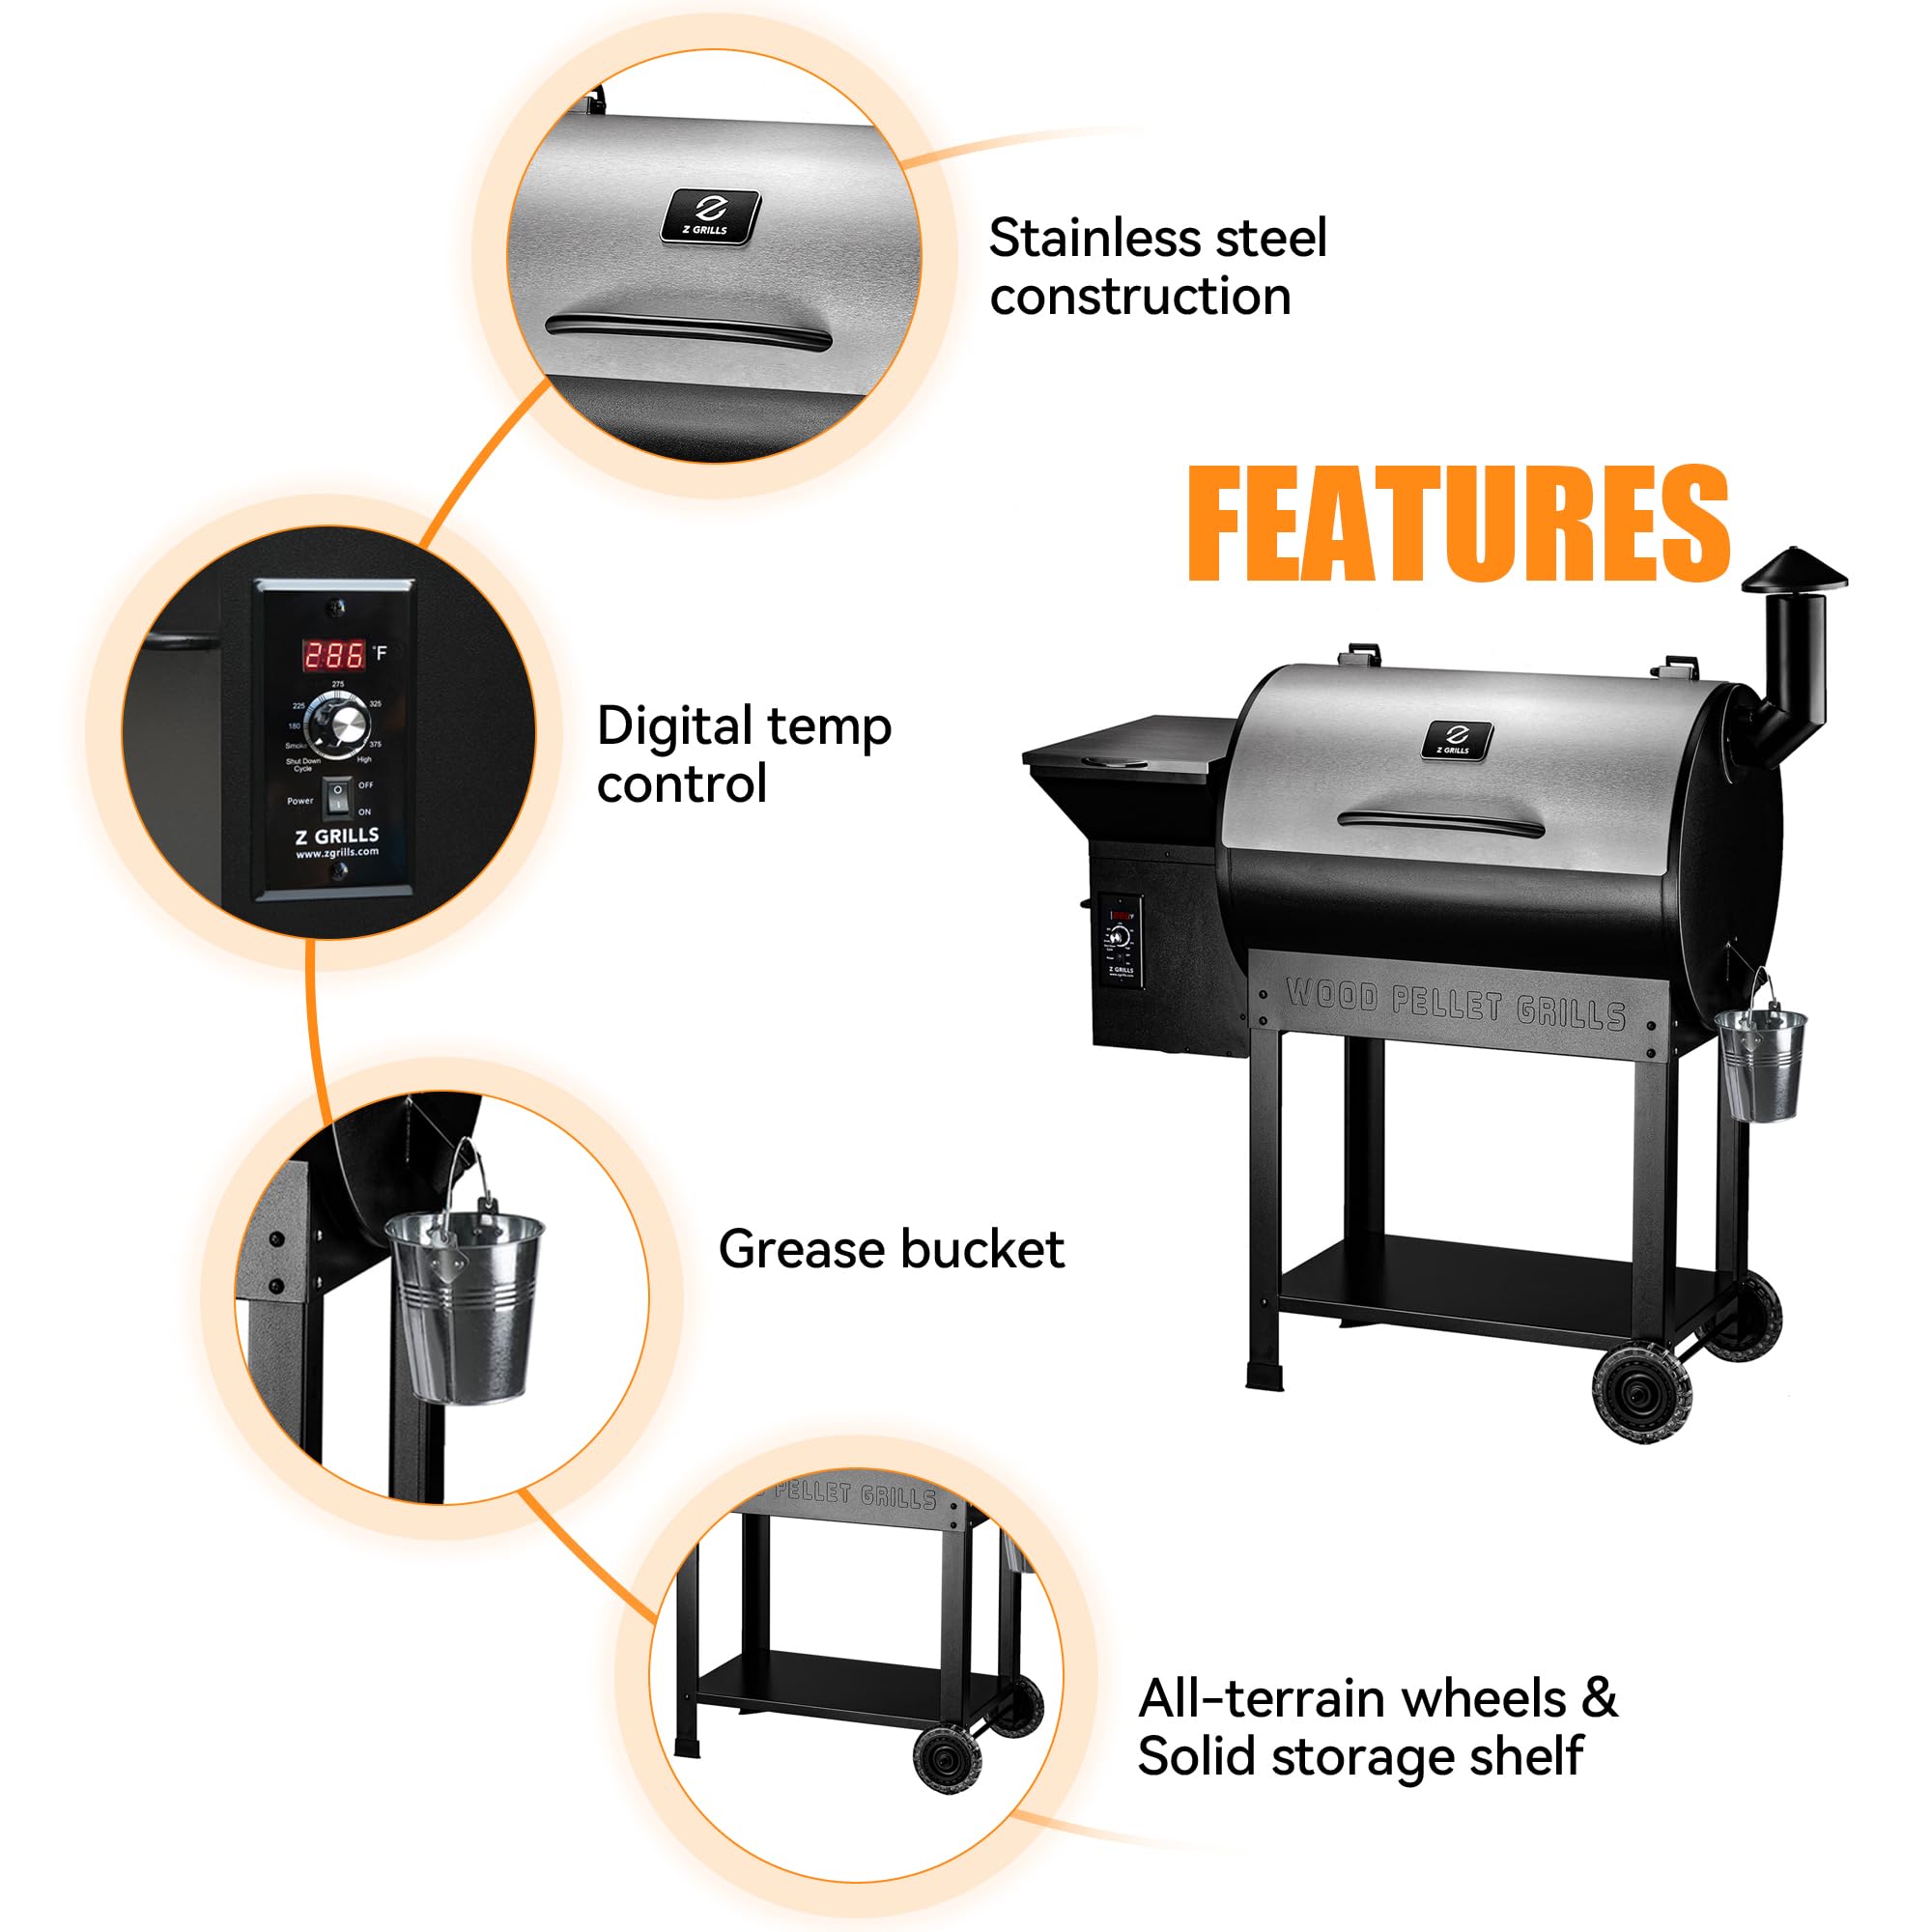 Z GRILLS Wood Pellet Smoker Grill, 8 in 1 BBQ Grill with Auto Temperature Control, 697 sq in Cooking Area for Backyard, Patio an